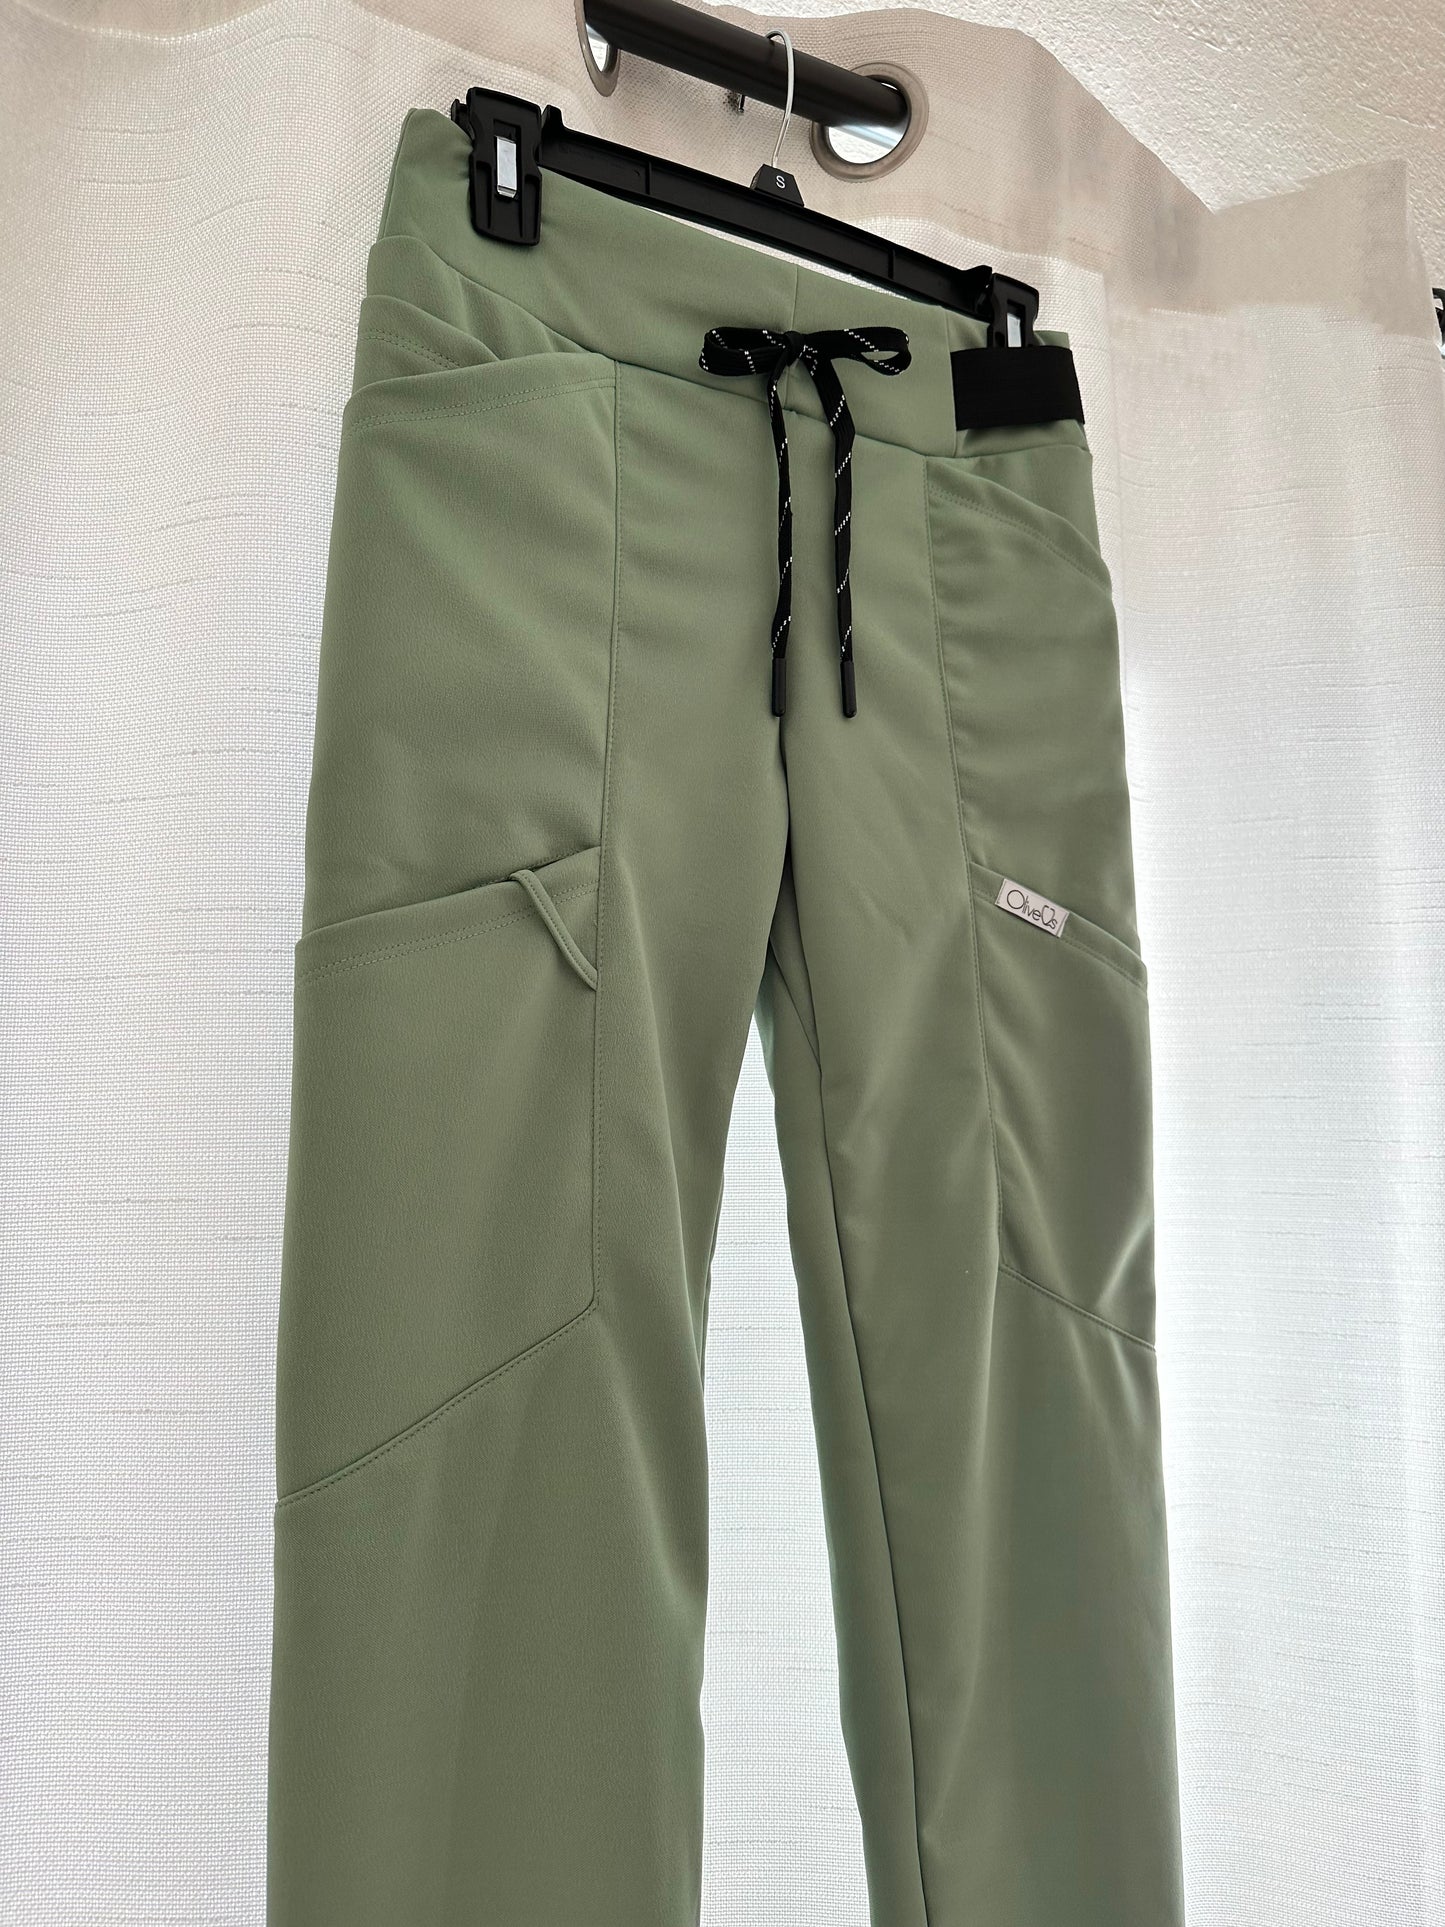 Olive Green Women's Pants for sale in Des Moines, Iowa, Facebook  Marketplace